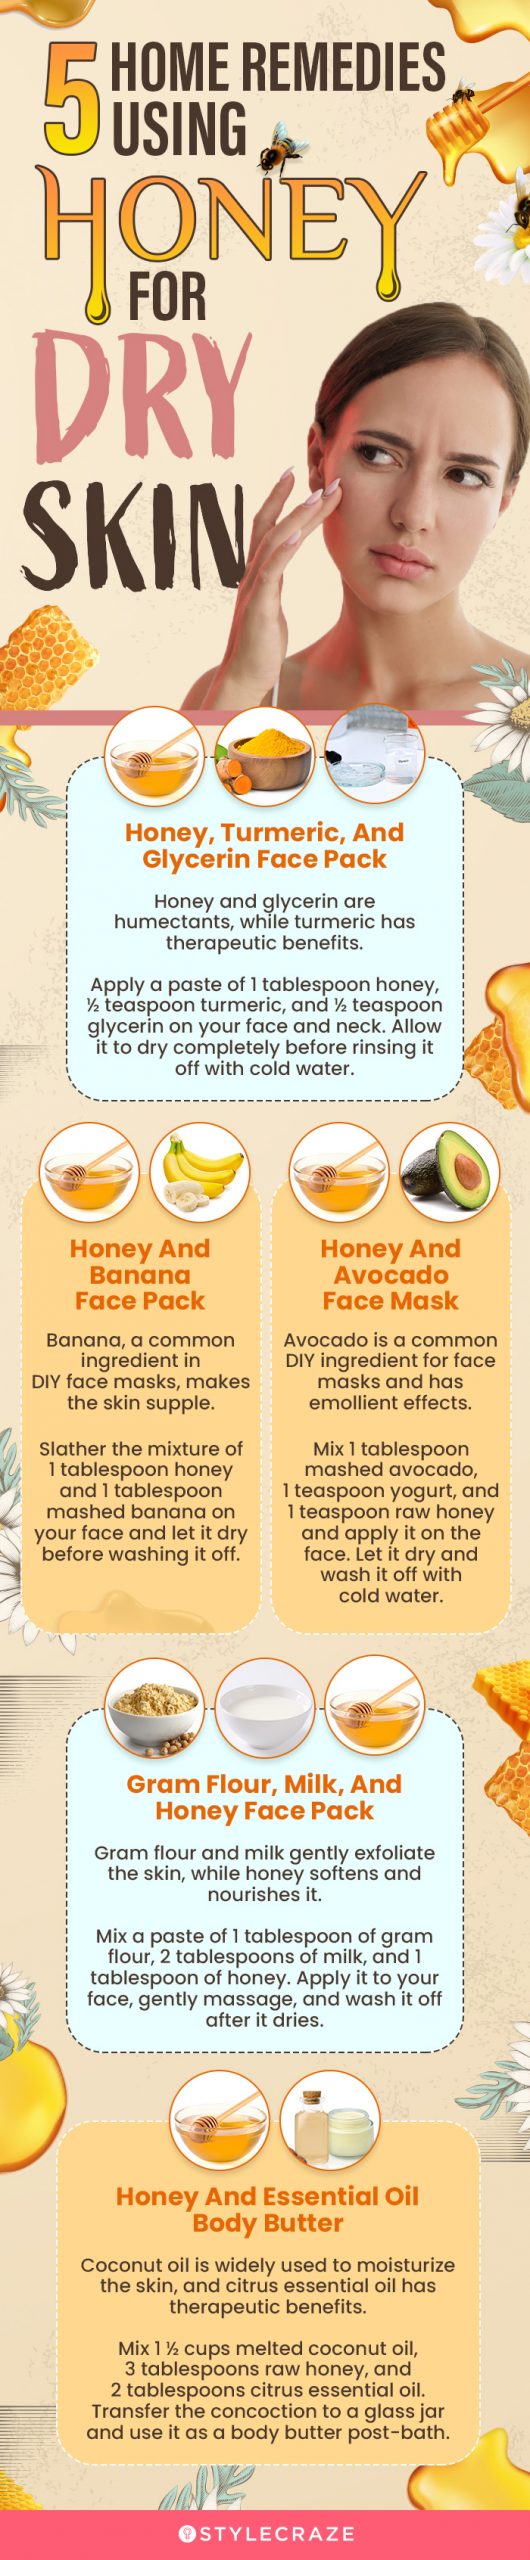 5 honey home remedies for dry skin (infographic)